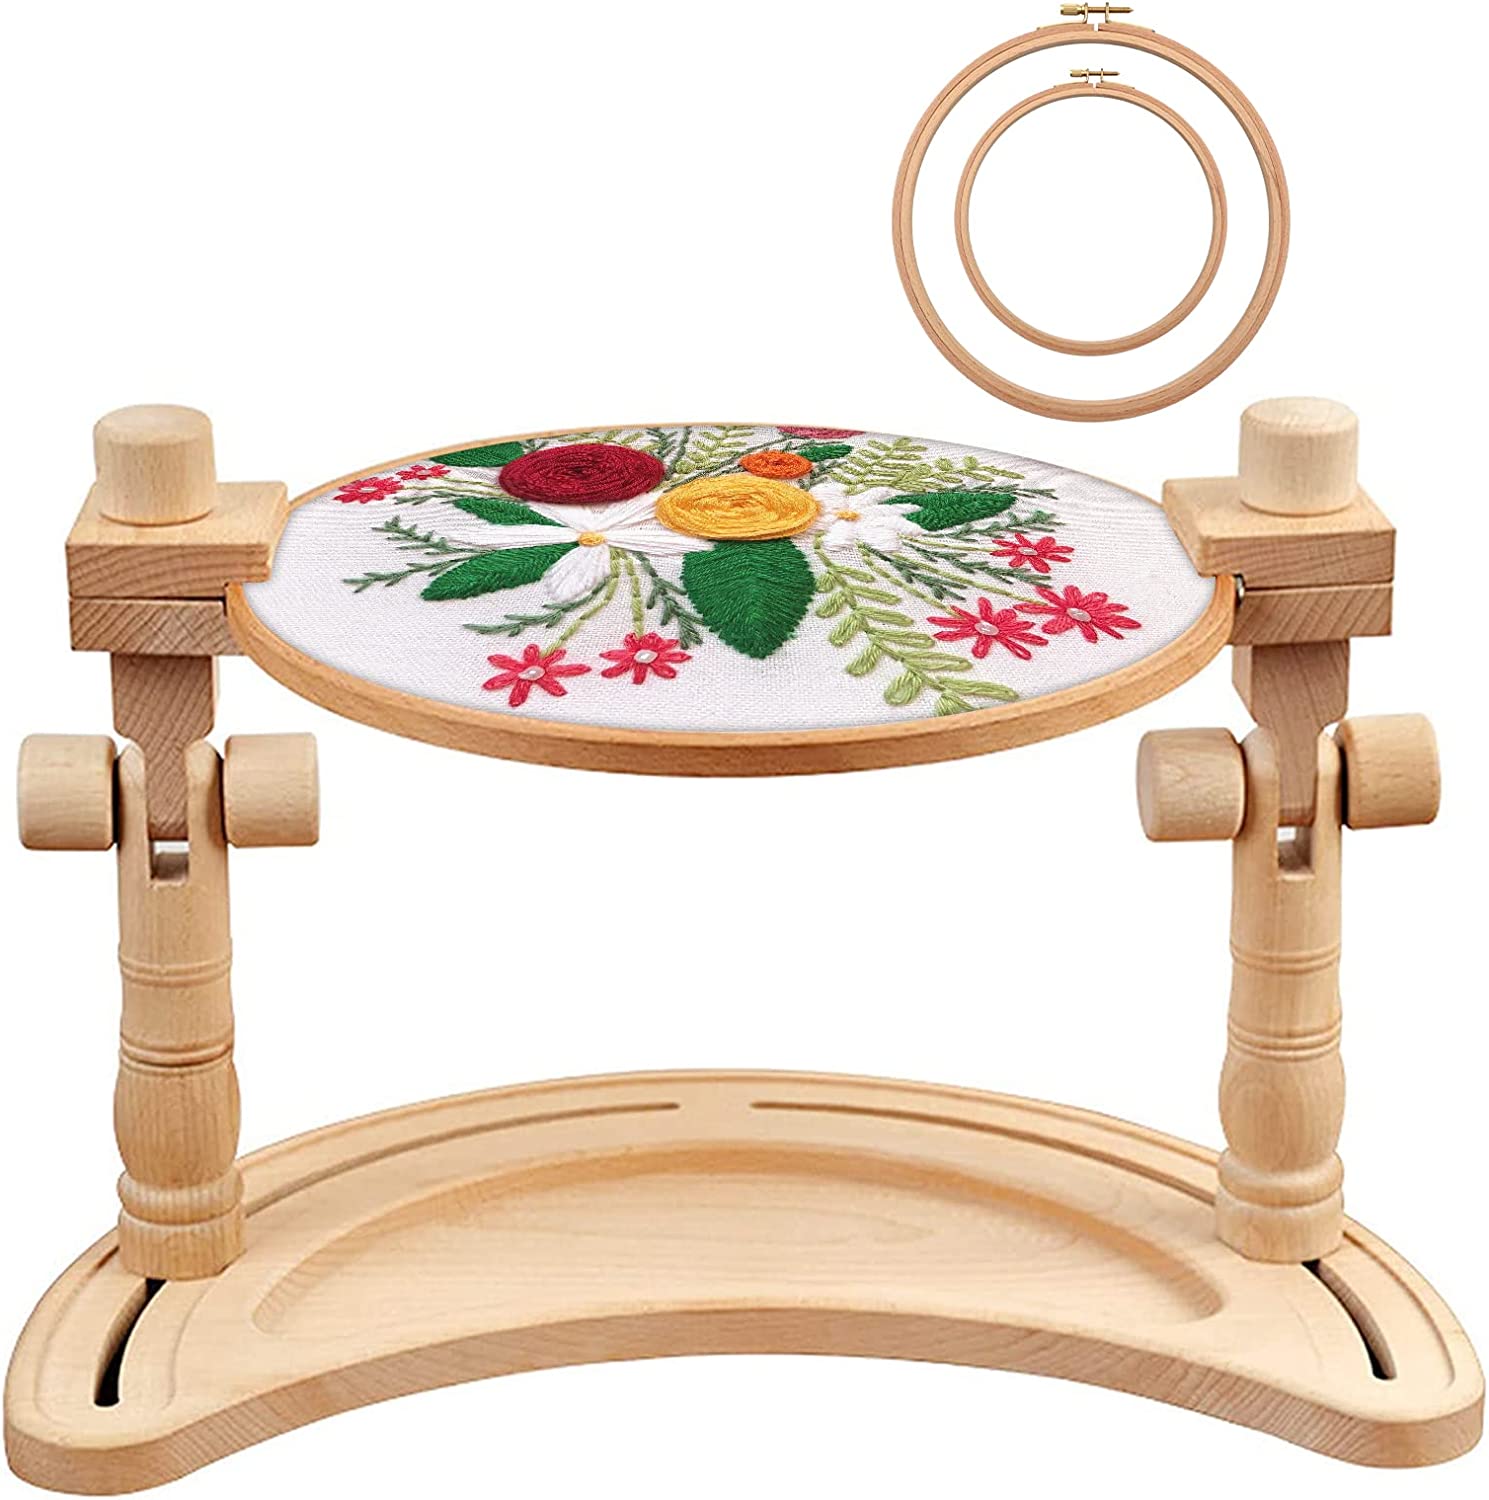 VEGCOO Multifunctional Beech Wood Embroidery Hoop Stand with 2 Pcs